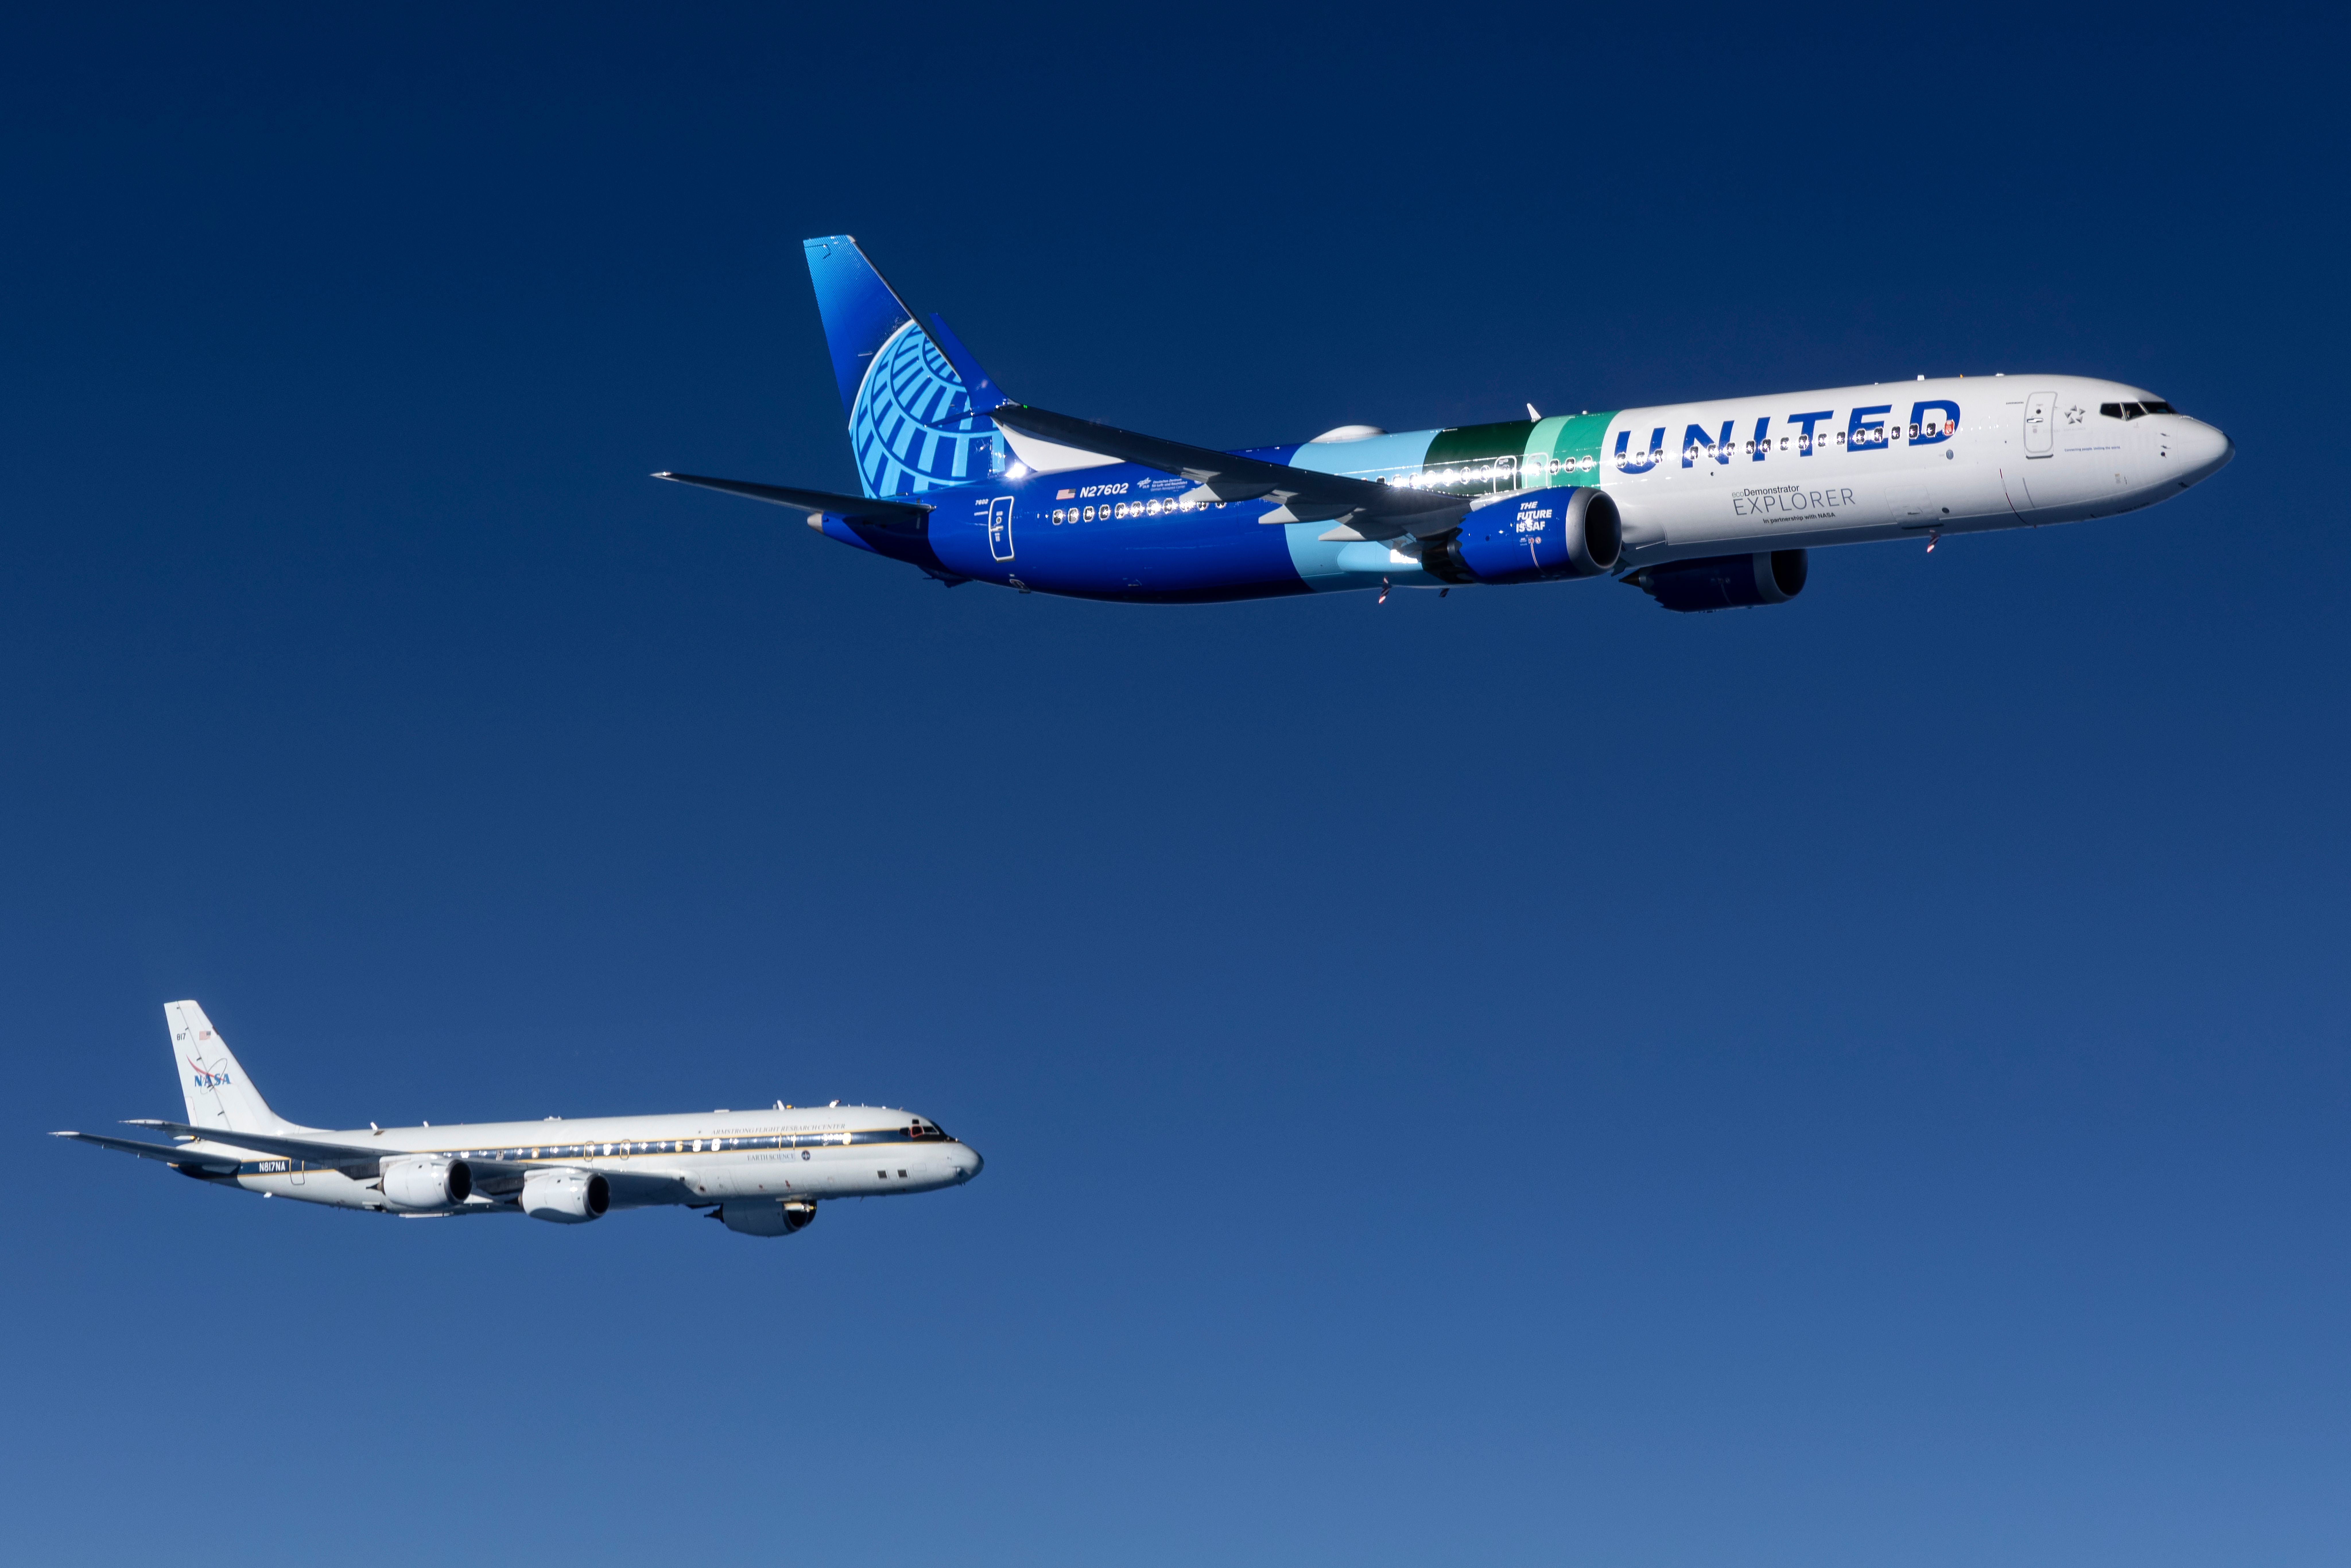 The Boeing United Airlines ecodemonstrator, trailed by NASA's DC-8